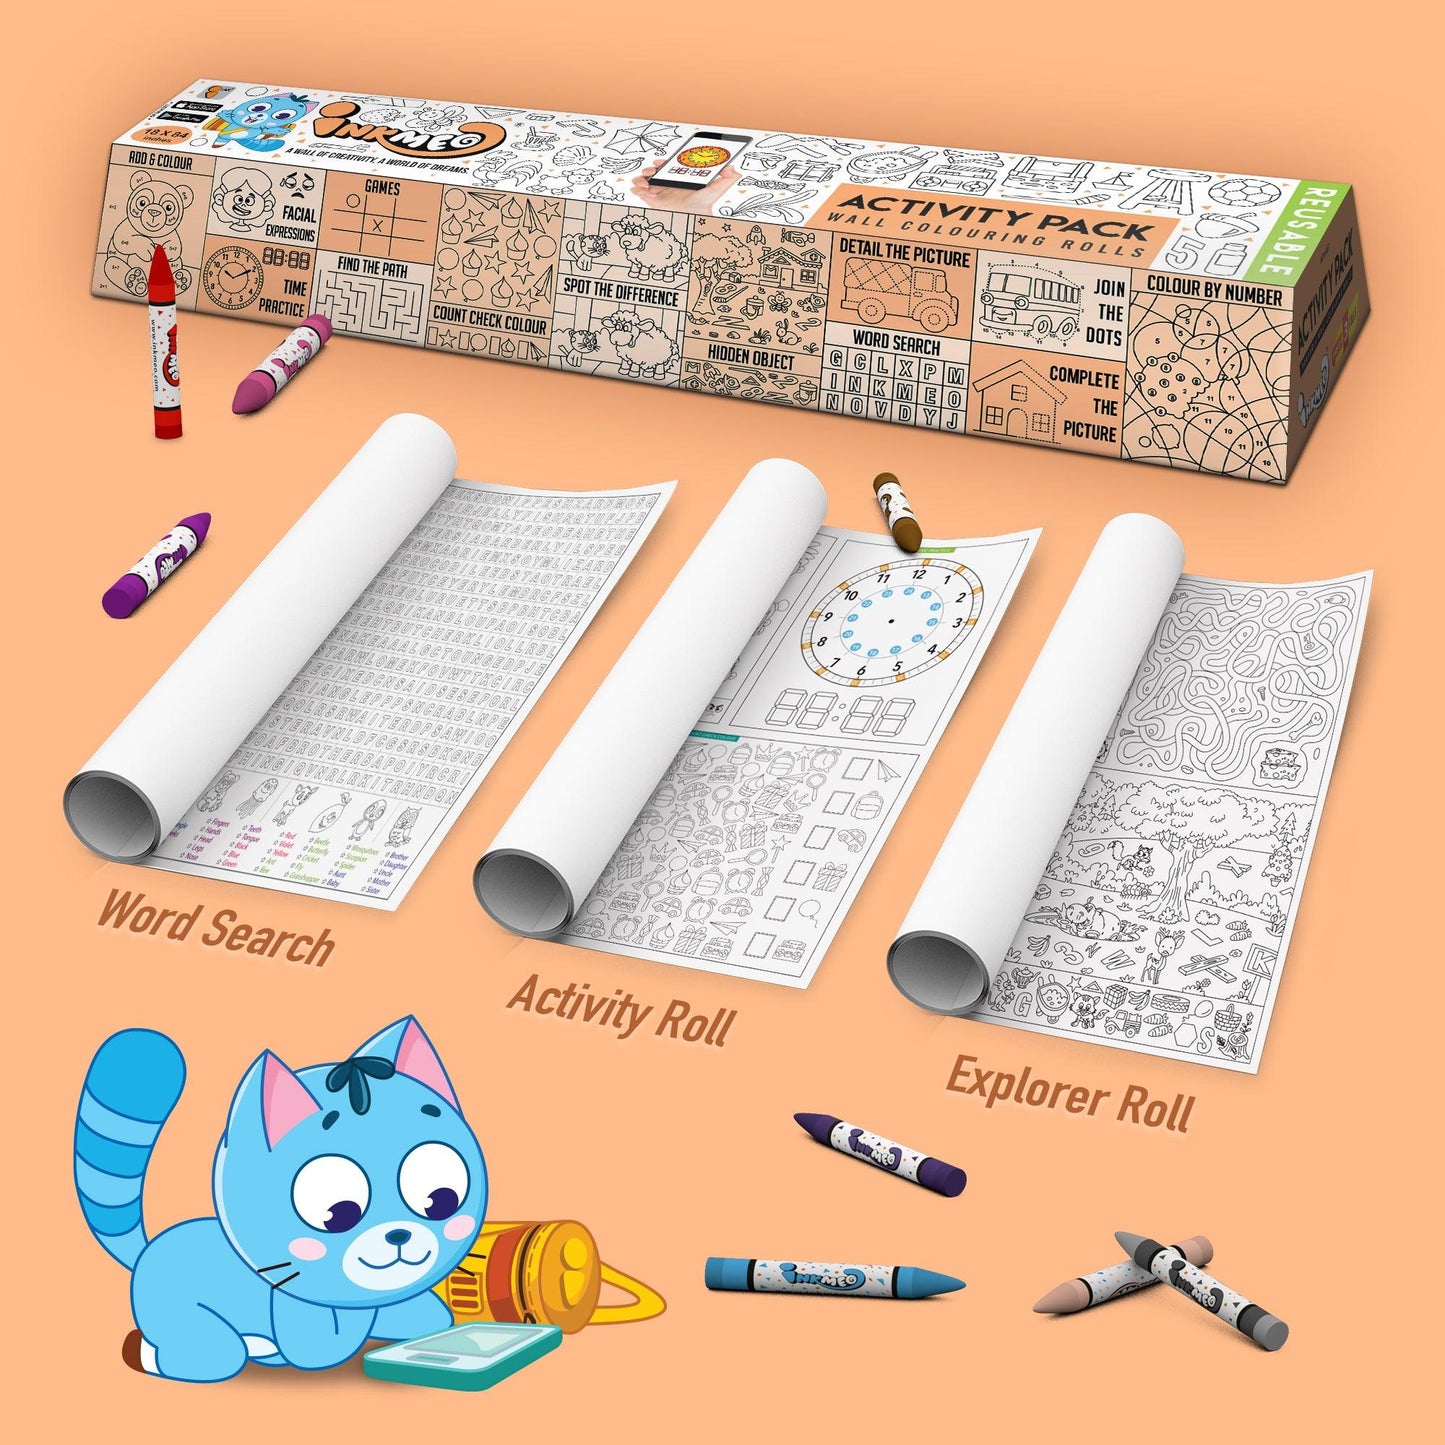 The image depicts an orange background with a large box containing three partially opened coloring rolls. A cartoon cat is lying on the front with crayons scattered around.